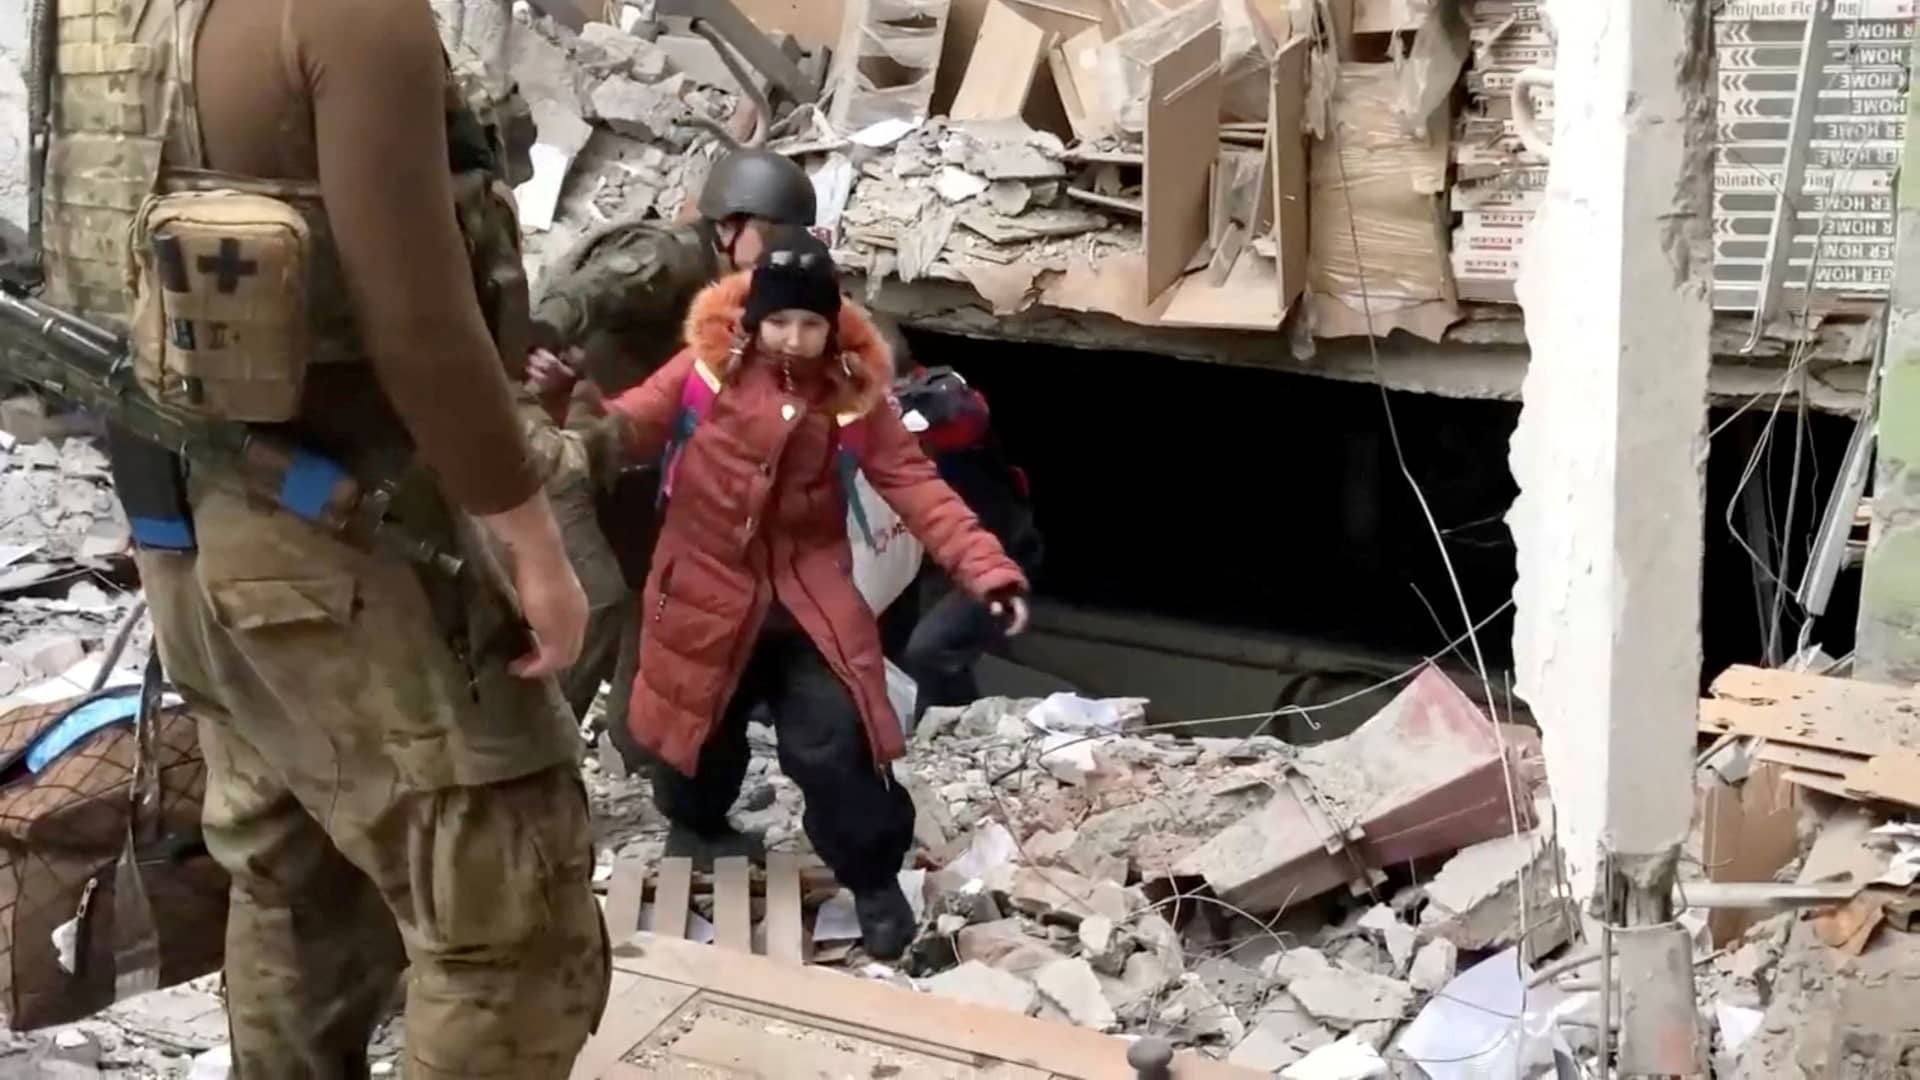 A child emerges from the Azovstal steel plant during UN-led evacuations, after nearly two months of siege warfare on the city by Russia during its invasion, in Mariupol, Ukraine in this still image from handout video released May 1, 2022. 